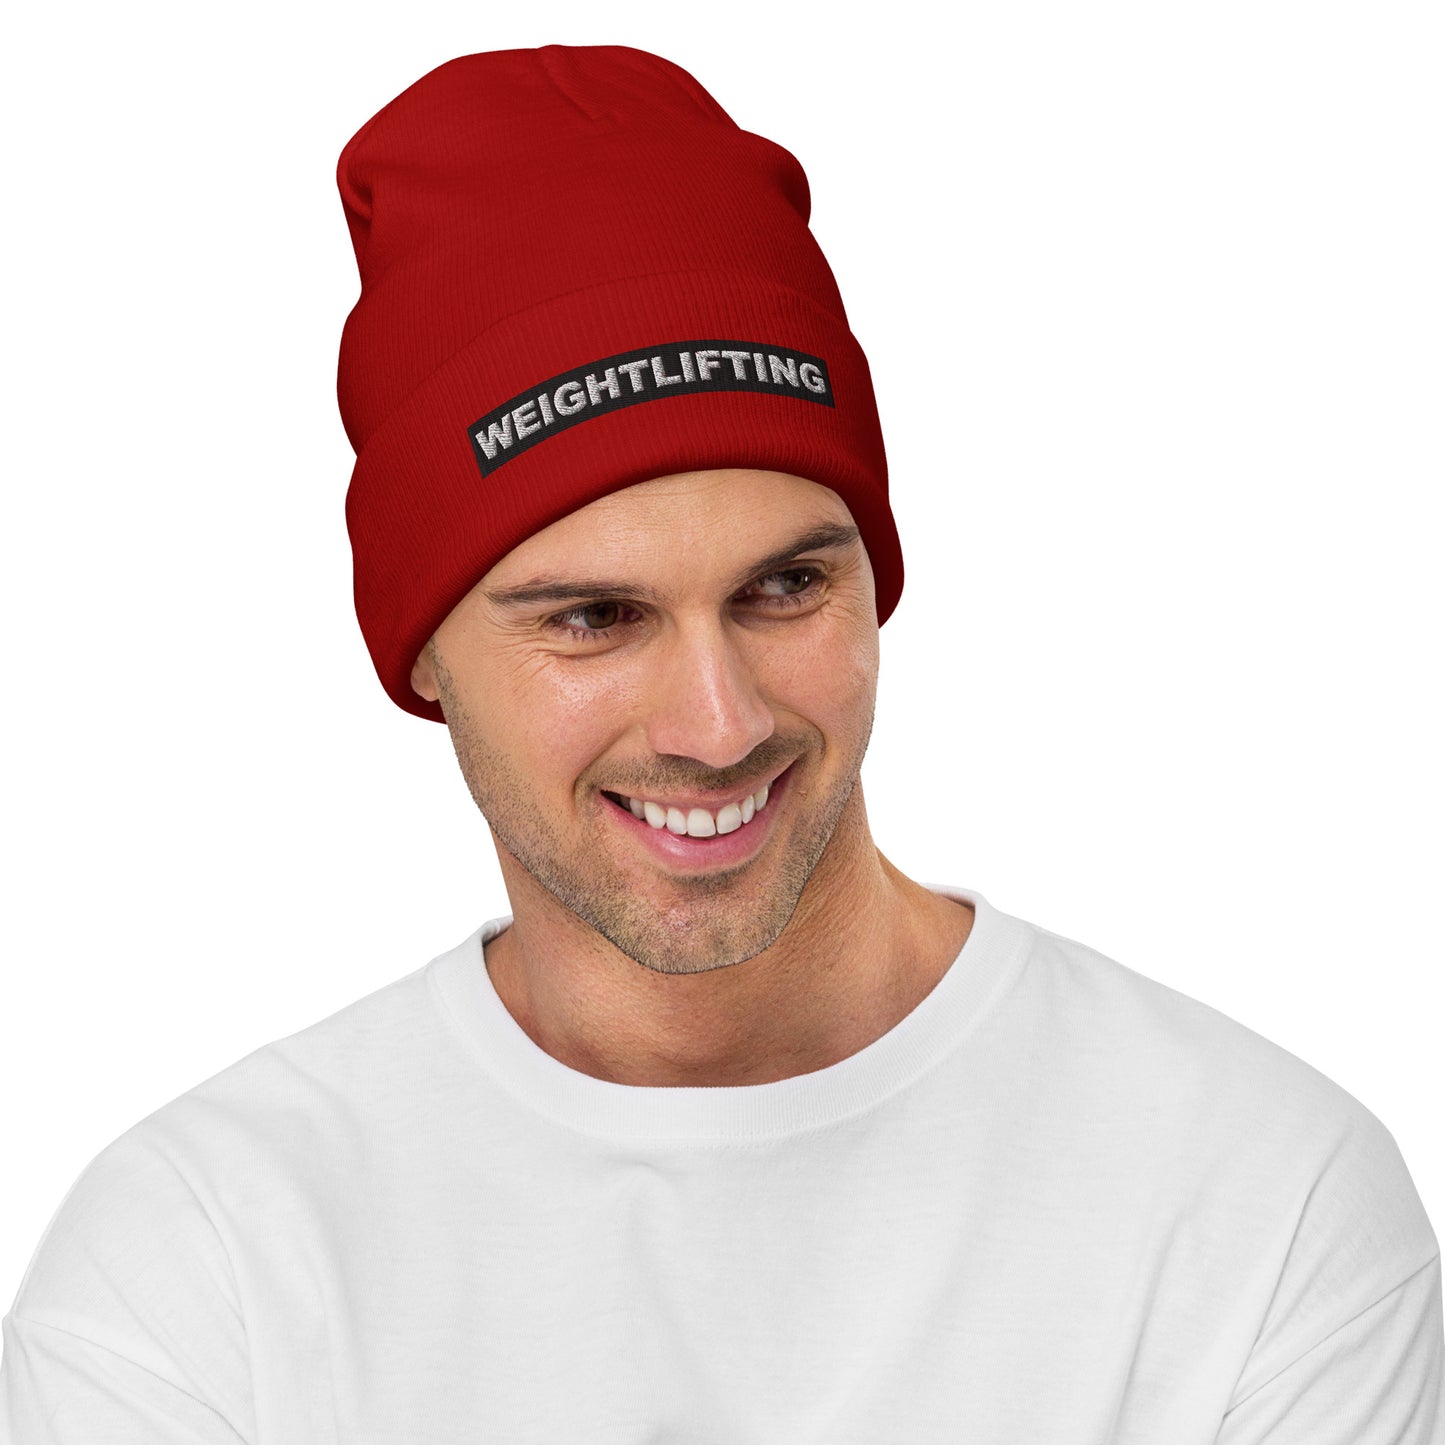 Weightlifting Box Logo - Embroidered Beanie